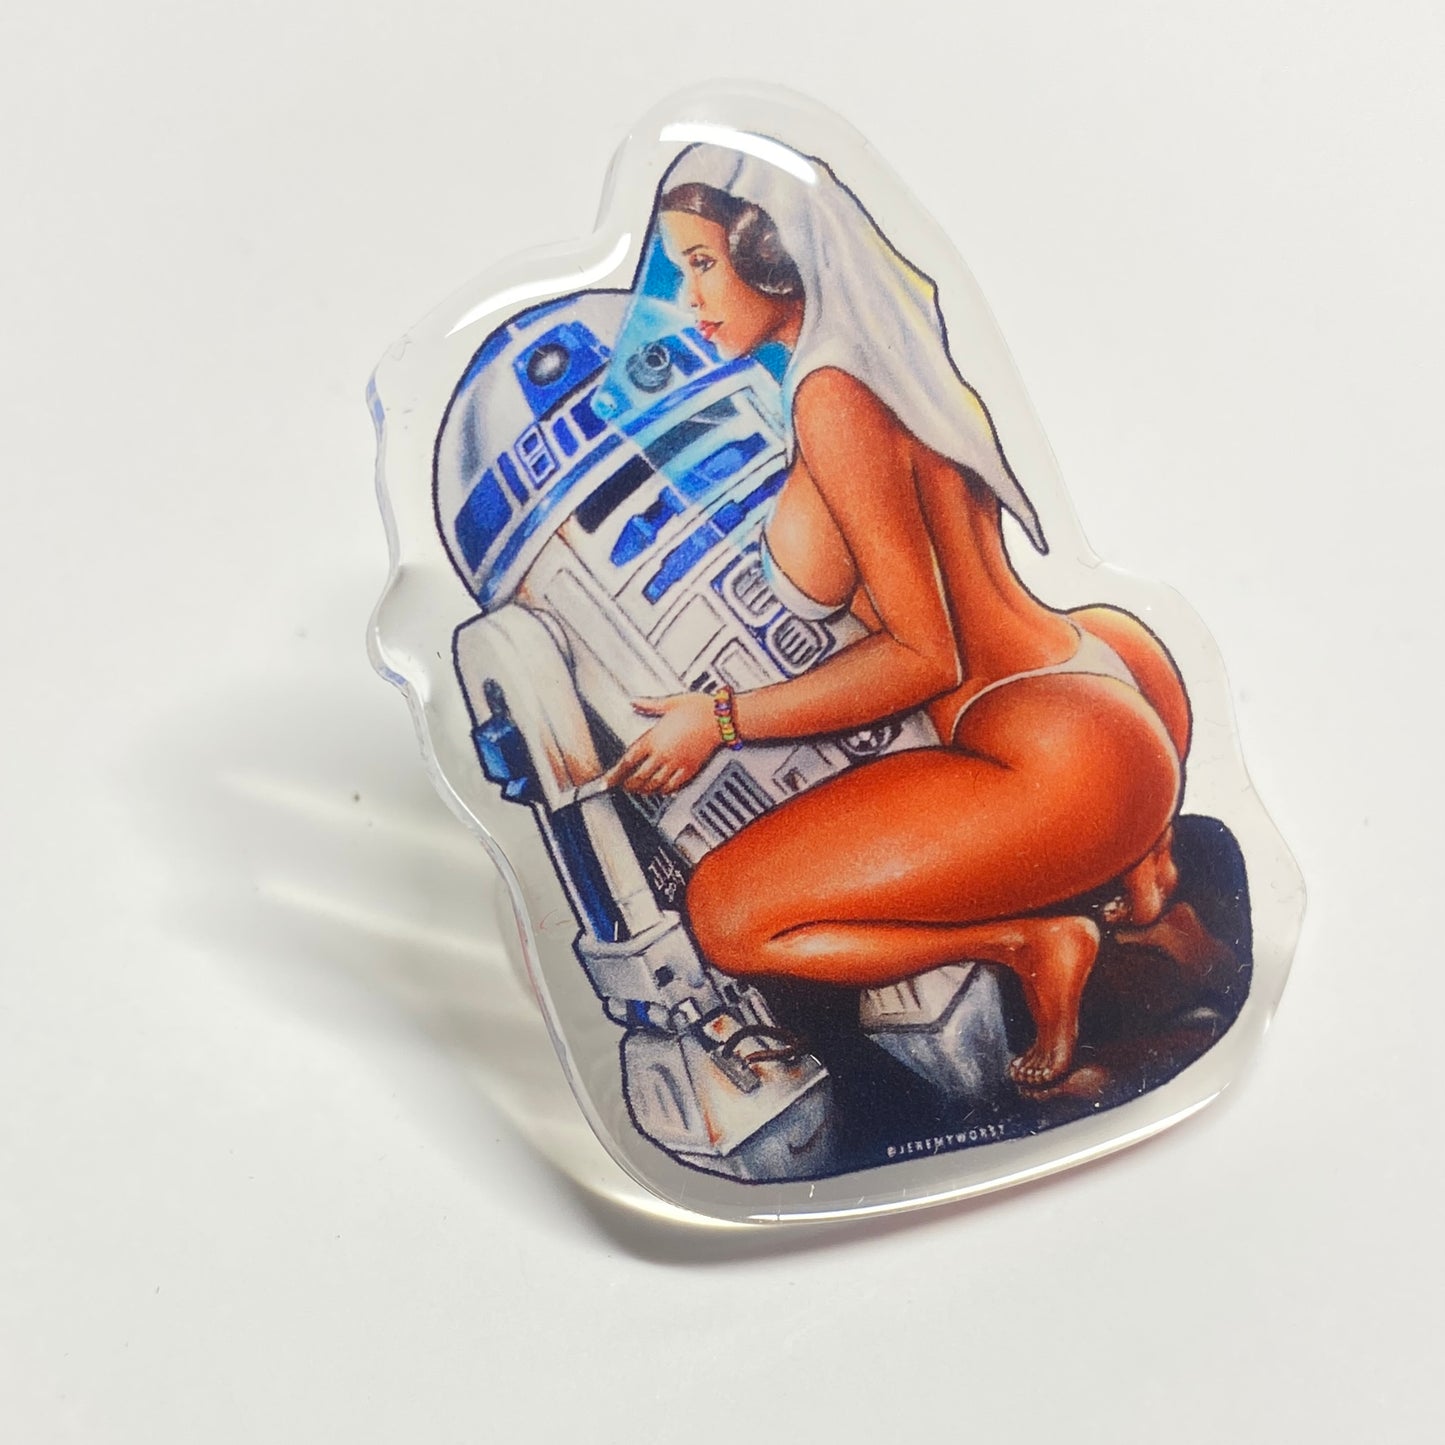 JEREMY WORST Pins sexy pinup cosplay wars acrylic Pins